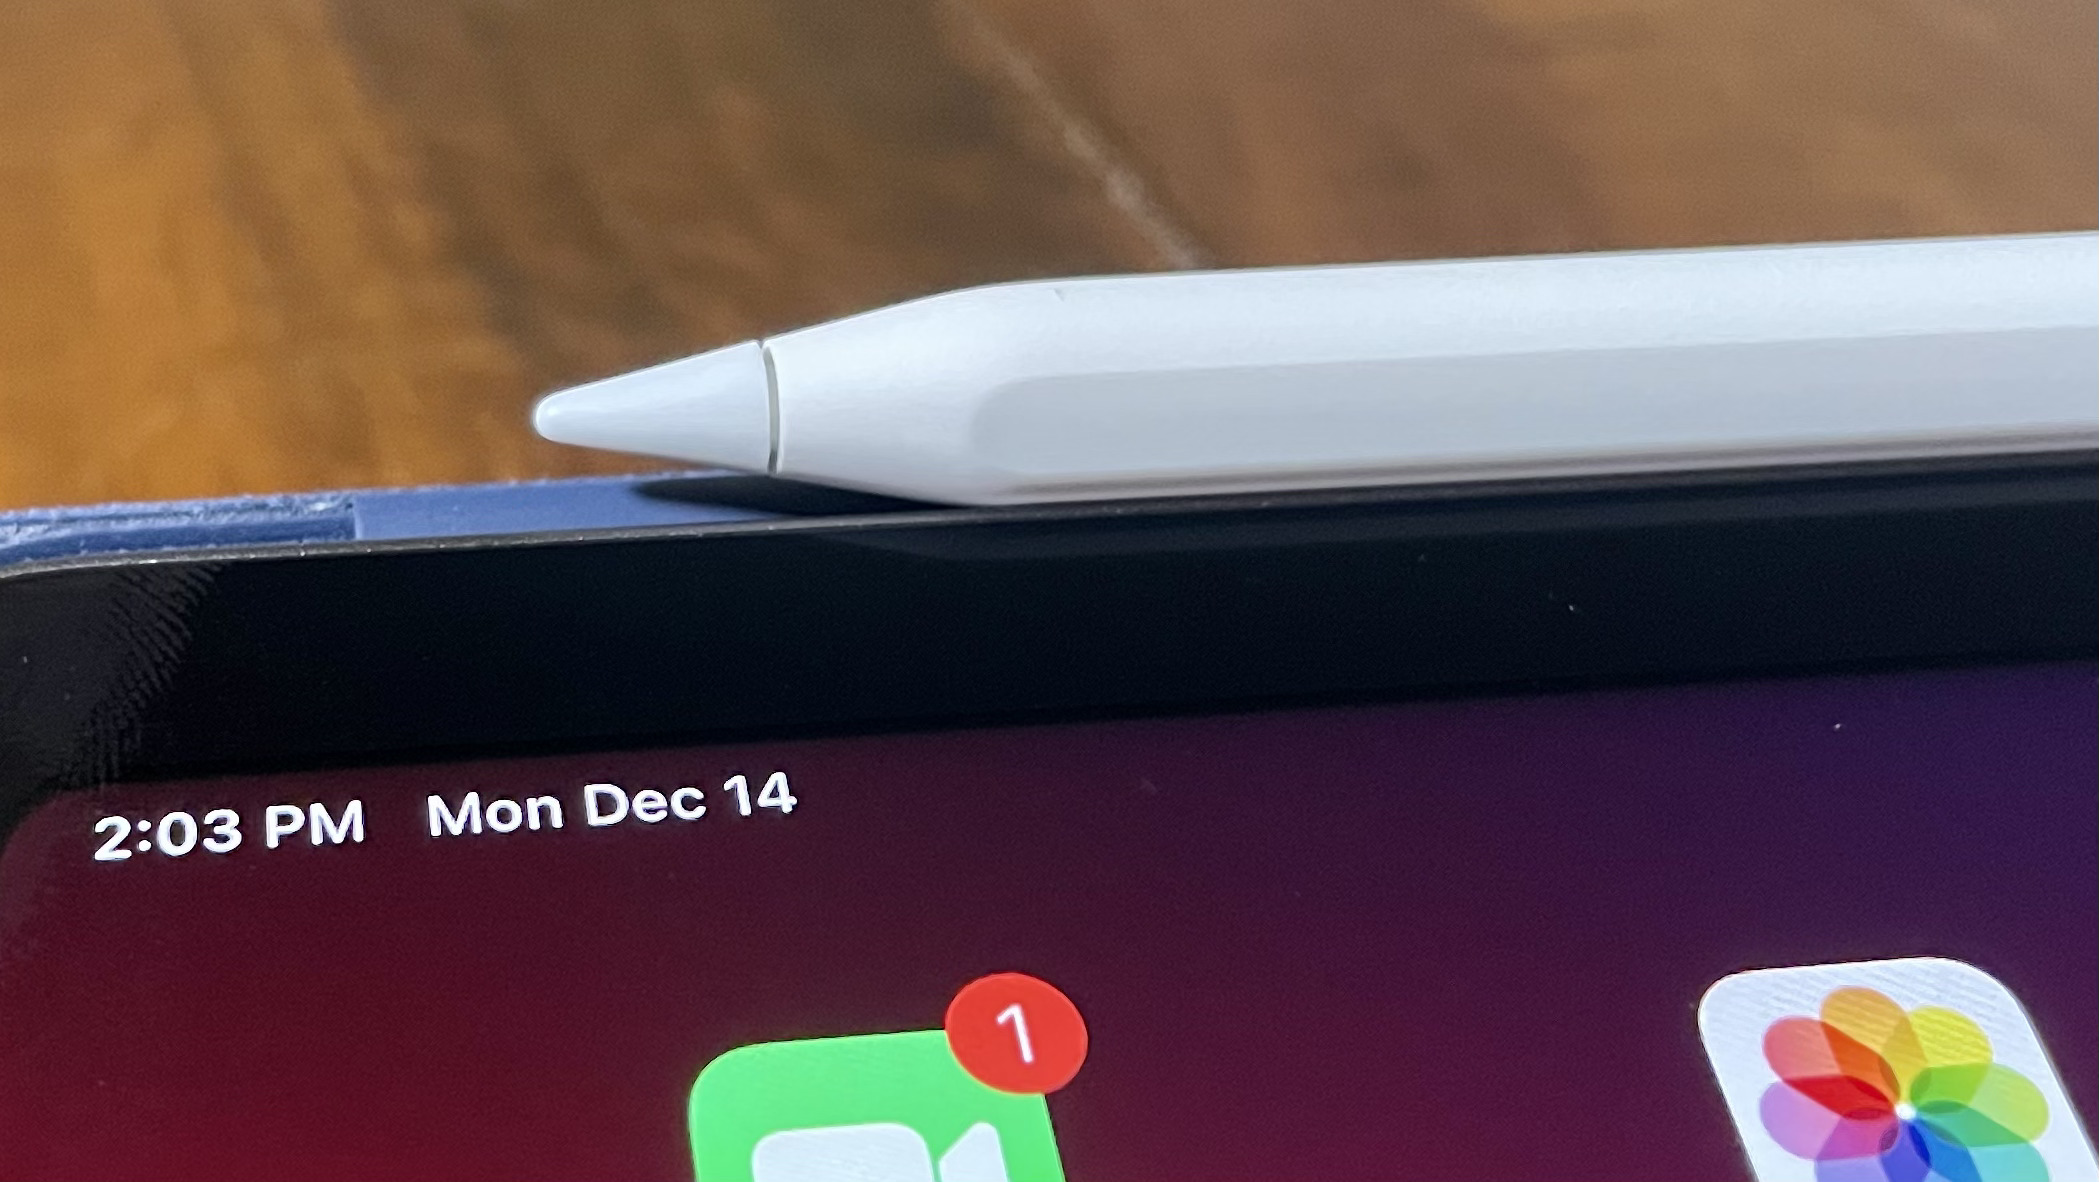 Pair Apple Pencil 2nd Generation To Your iPad | UpPhone